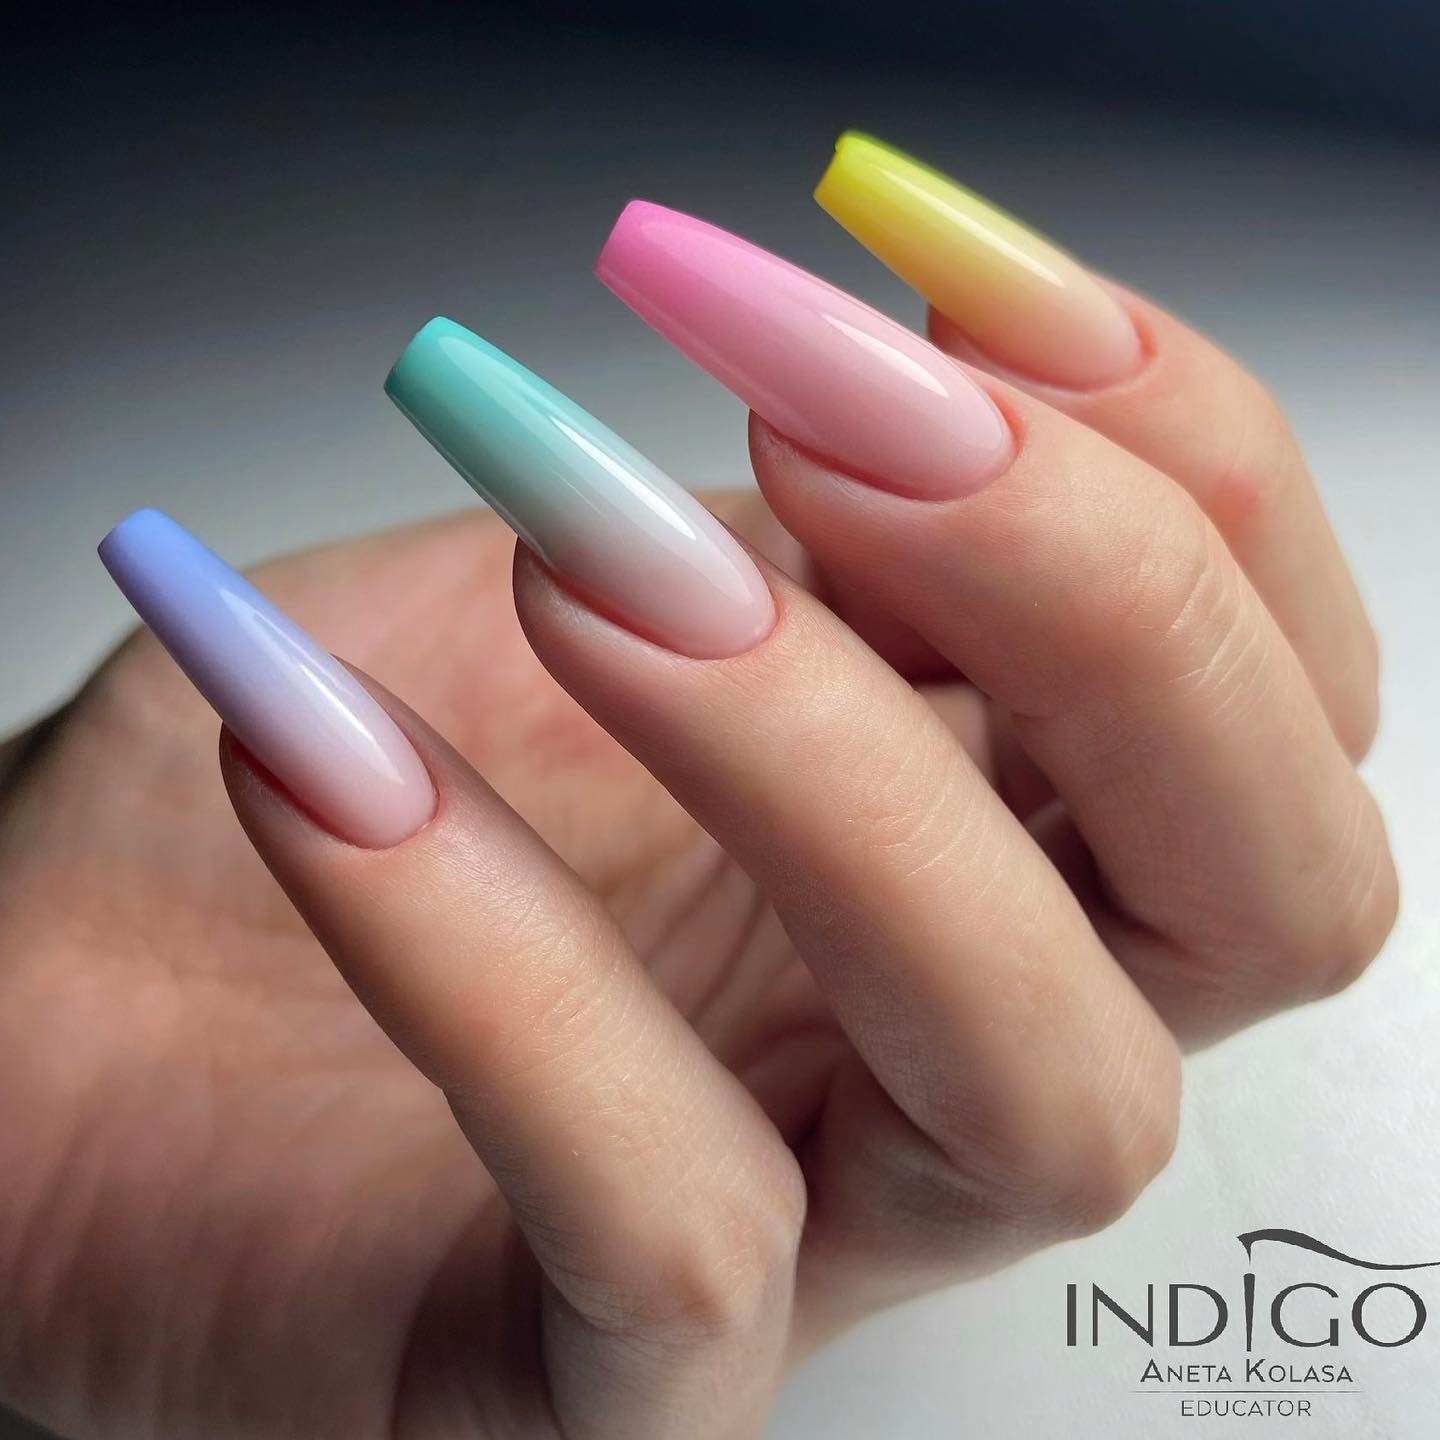 Wanna cheer up your ballerina nails? If your answer is yes, go for an ombre effect! The color change is so subtle, but it looks like you've got a bunch of different shades on your nails. It's a great way to make a statement without going full-on rainbow.